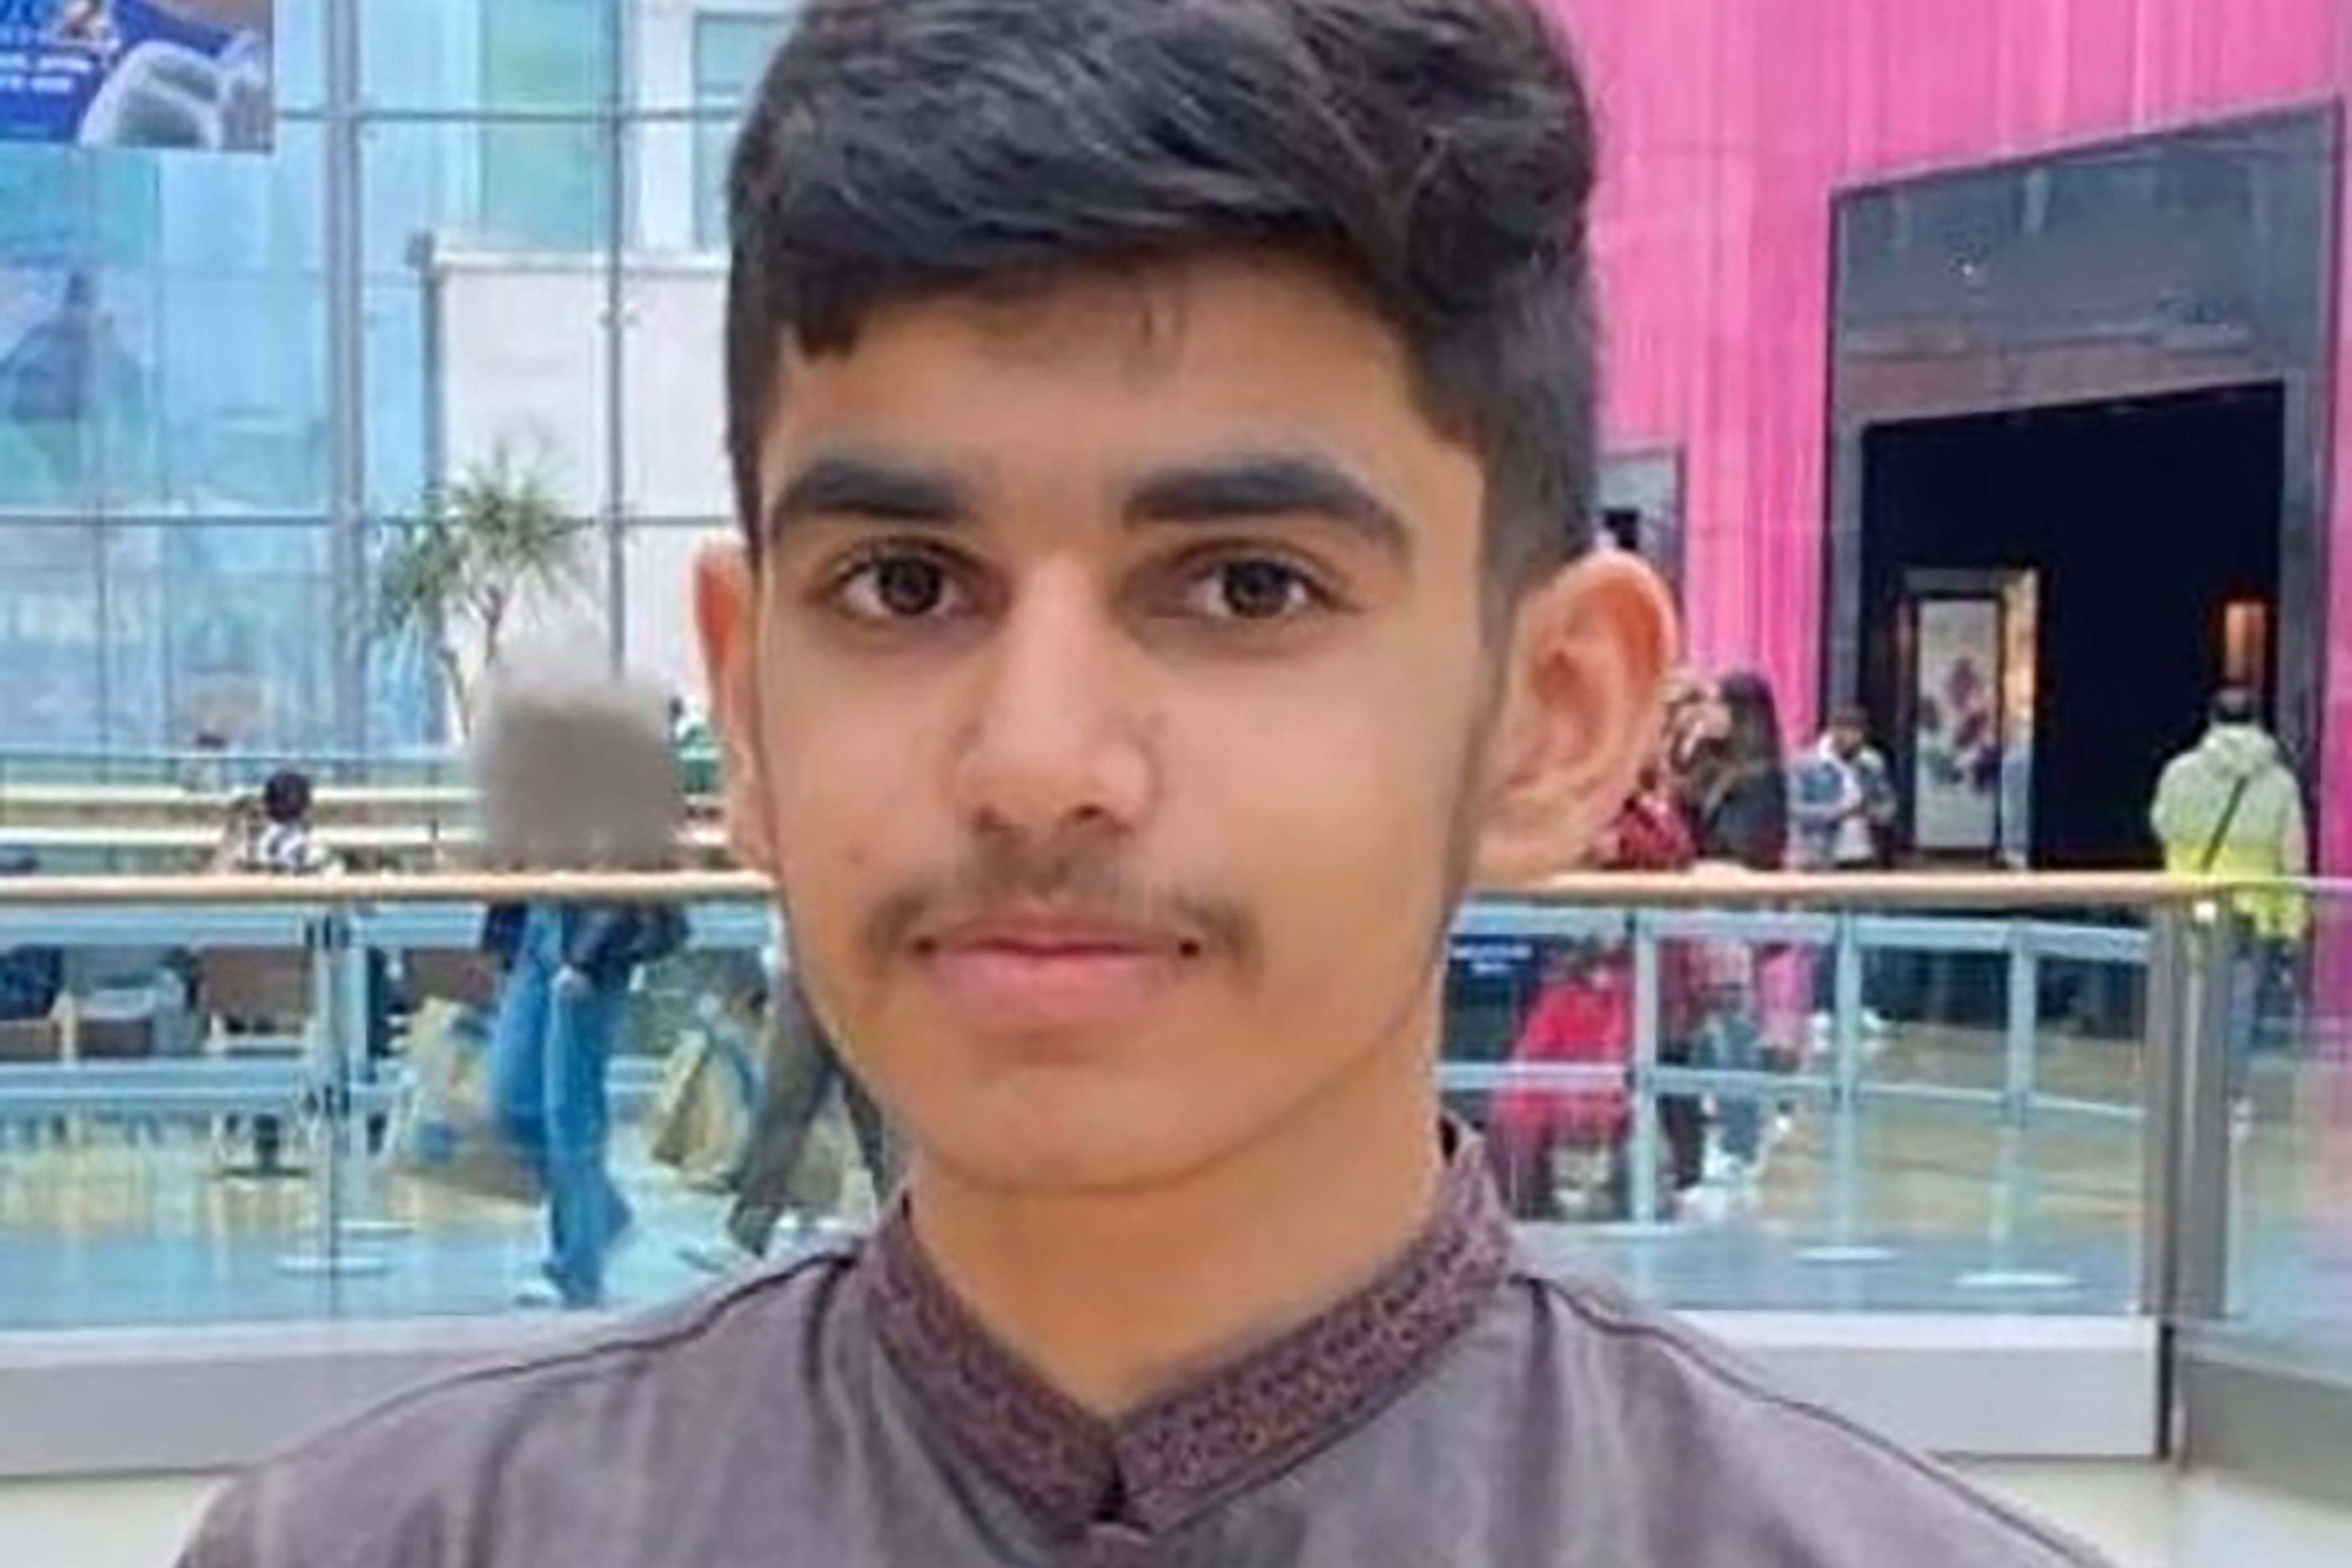 Muhammad Hassam Ali, 17, who died from his injuries after he was stabbed in Victoria Square, Birmingham on Saturday. (West Midlands Police/PA)